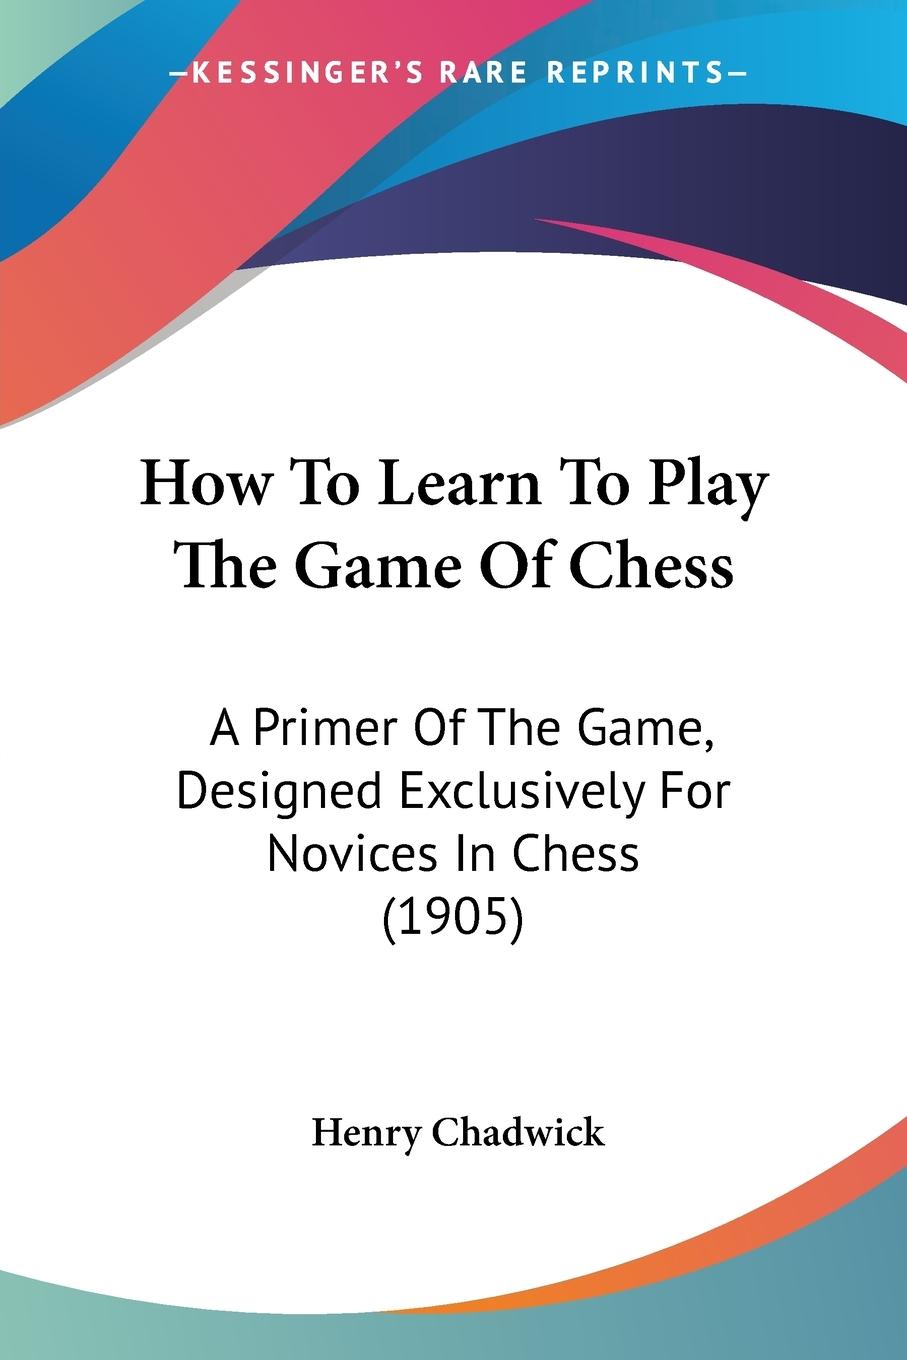 How To Learn To Play The Game Of Chess